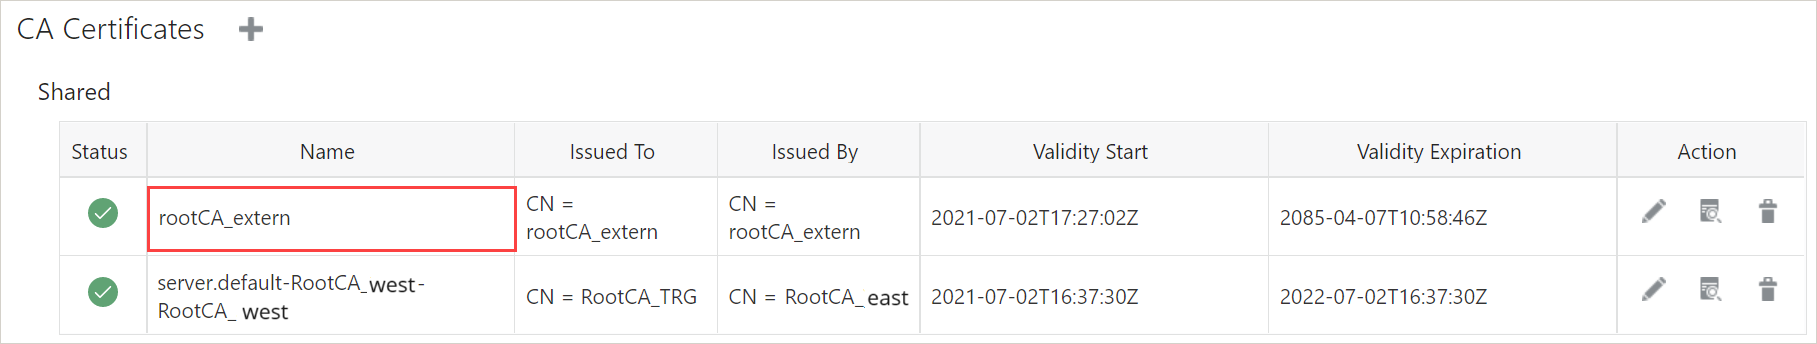 rootCA_extern Root certificate generated using OpenSSL is added on the target deployment.